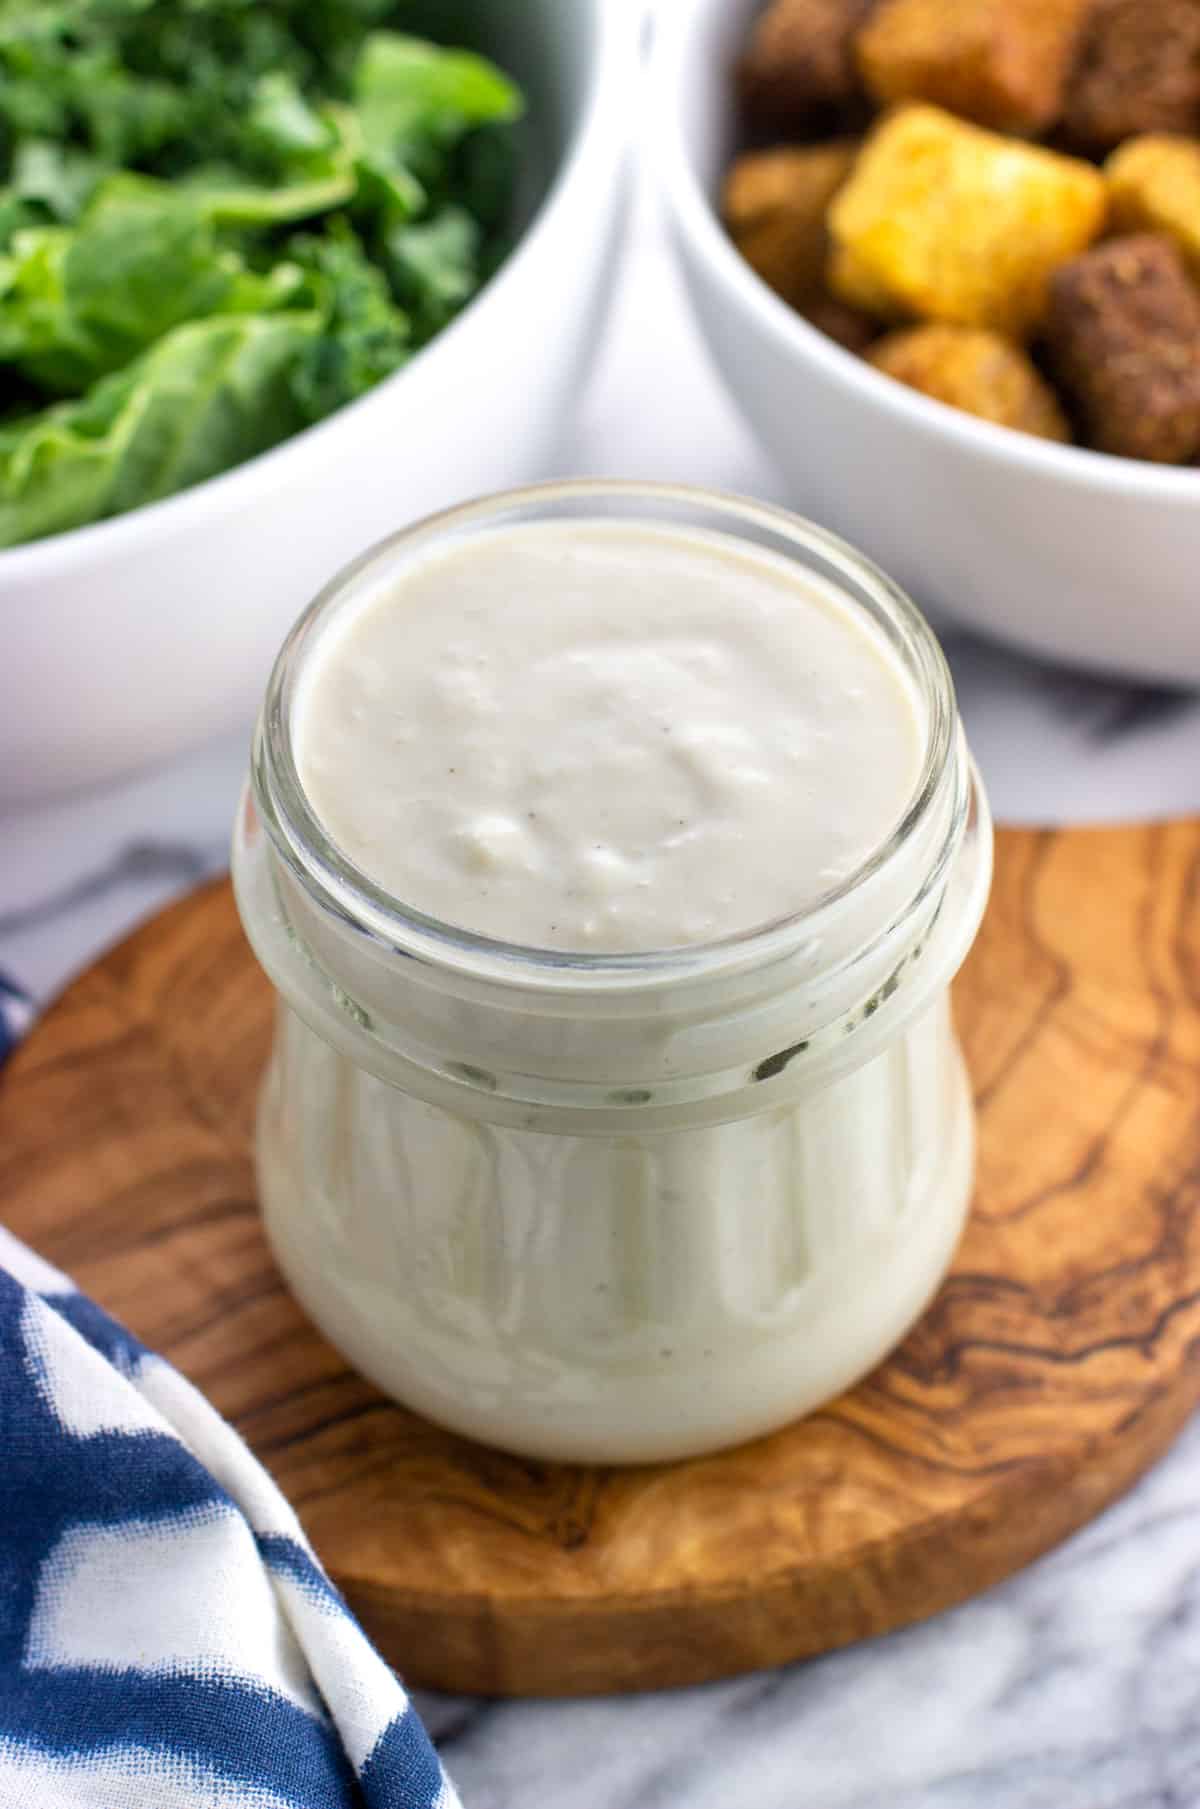 A glass jar of caesar dressing with salad ingredients in the background.